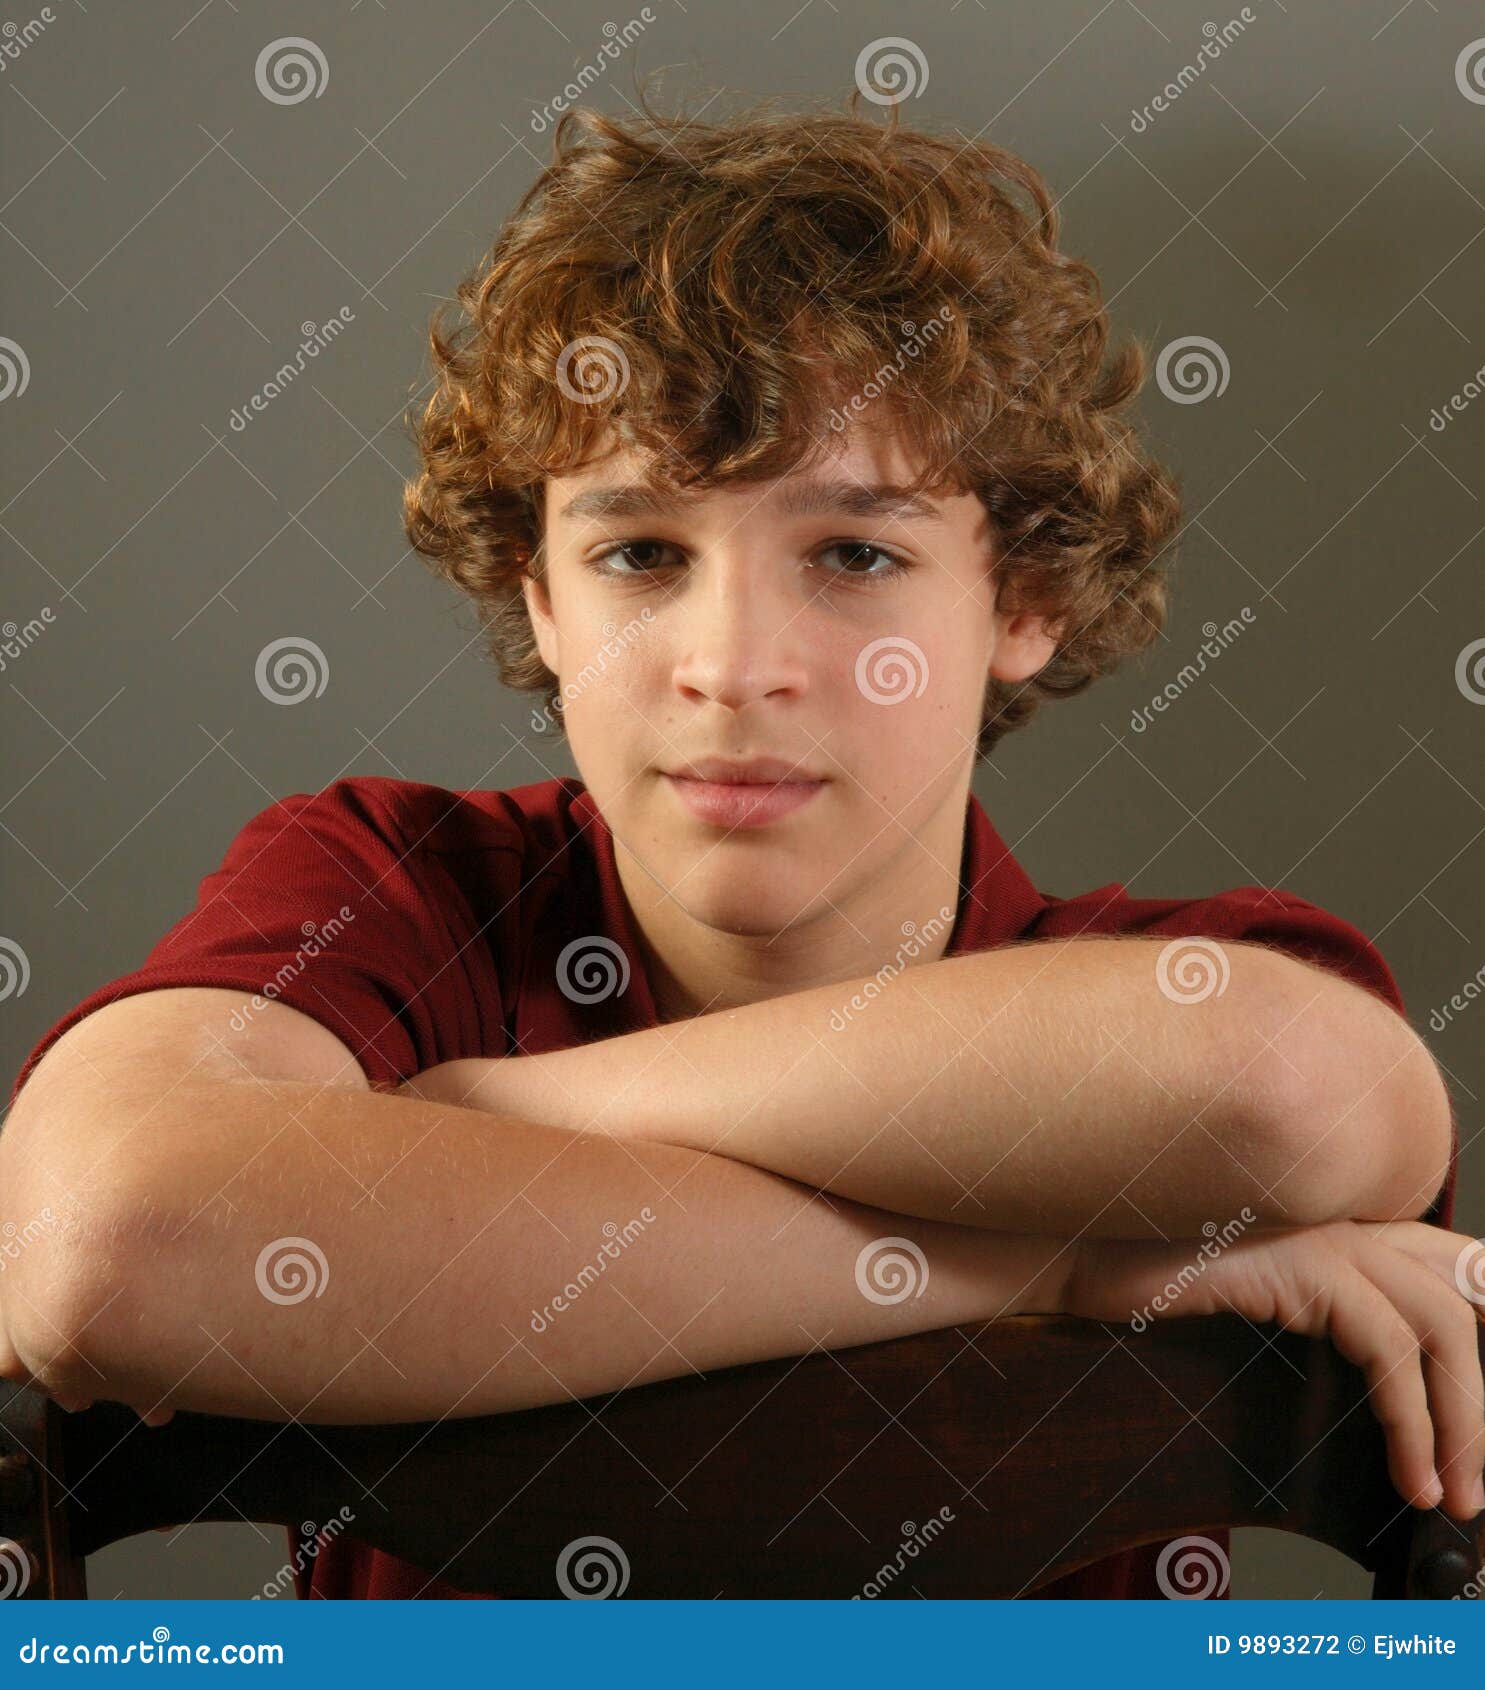 50 Coolest Haircuts for Boys With Curly Hair (2023 Trends)